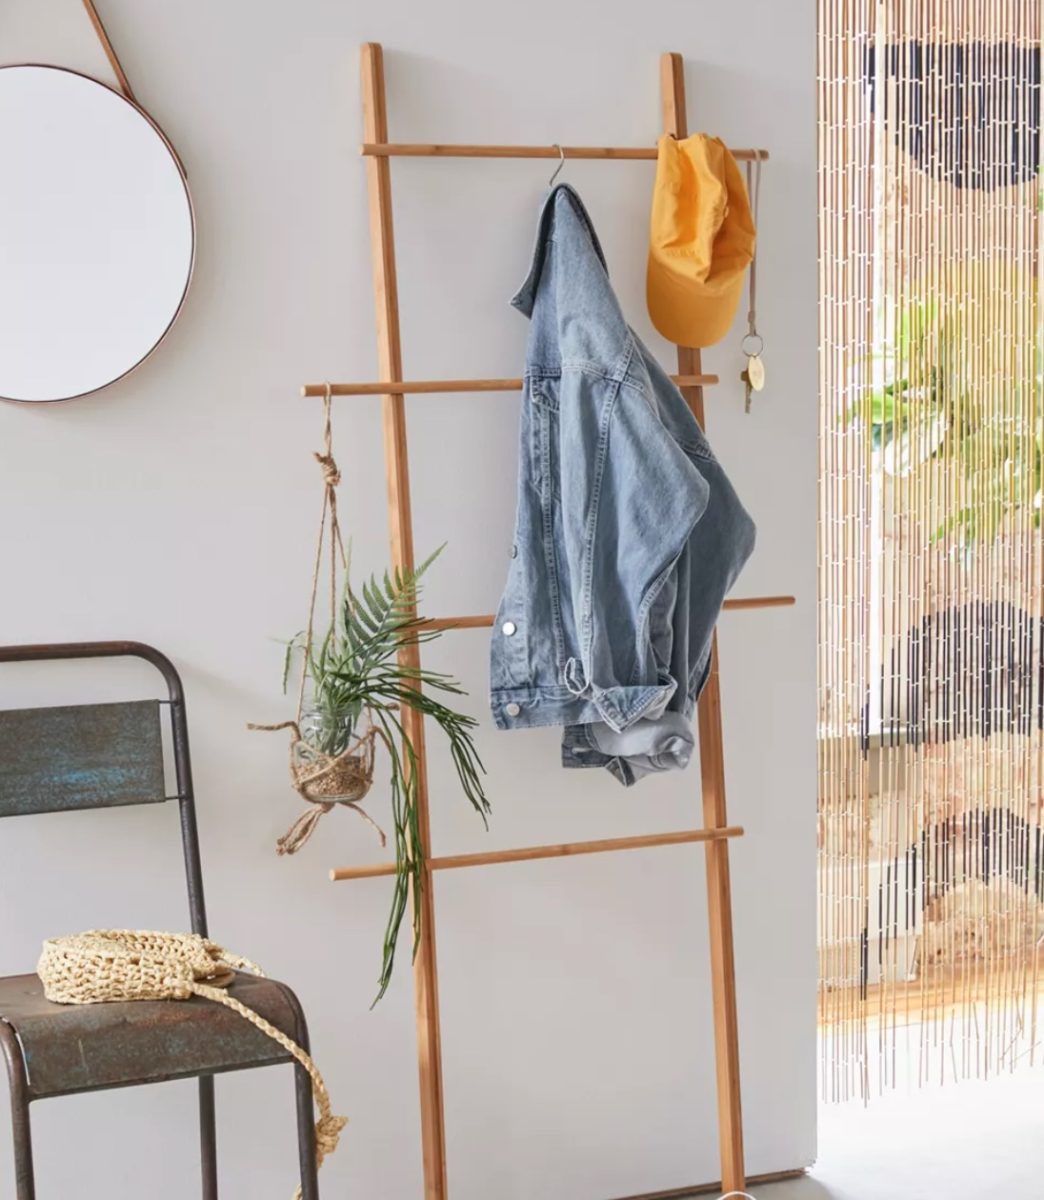 Practical and Multi-Functional: These Home Decor Pieces are Well Worth the Money | It's home decor that is practical and multi-functional.